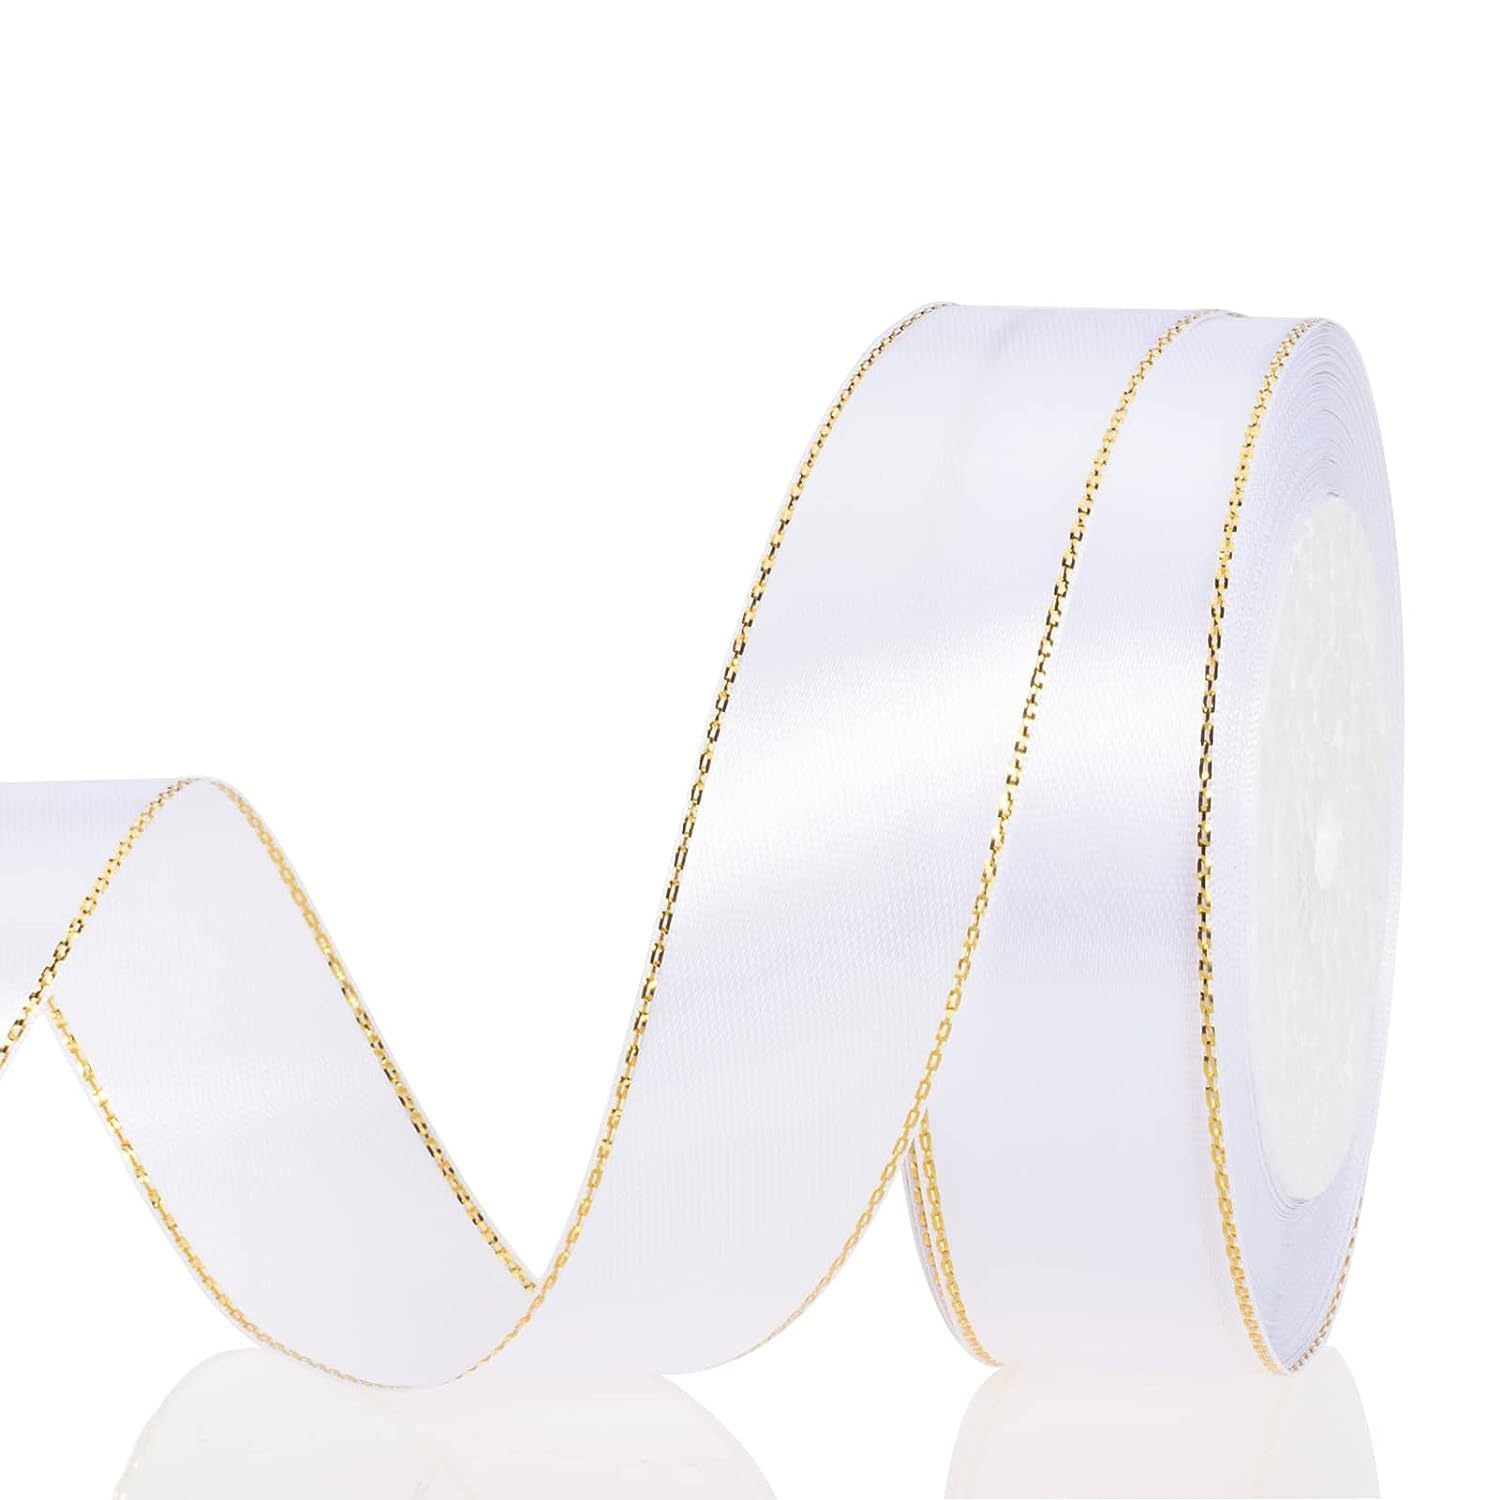 Primary image for 25 Yards 1 Inch White Satin Ribbon With Gold Edges, Gold Border Fabric Ribbons F